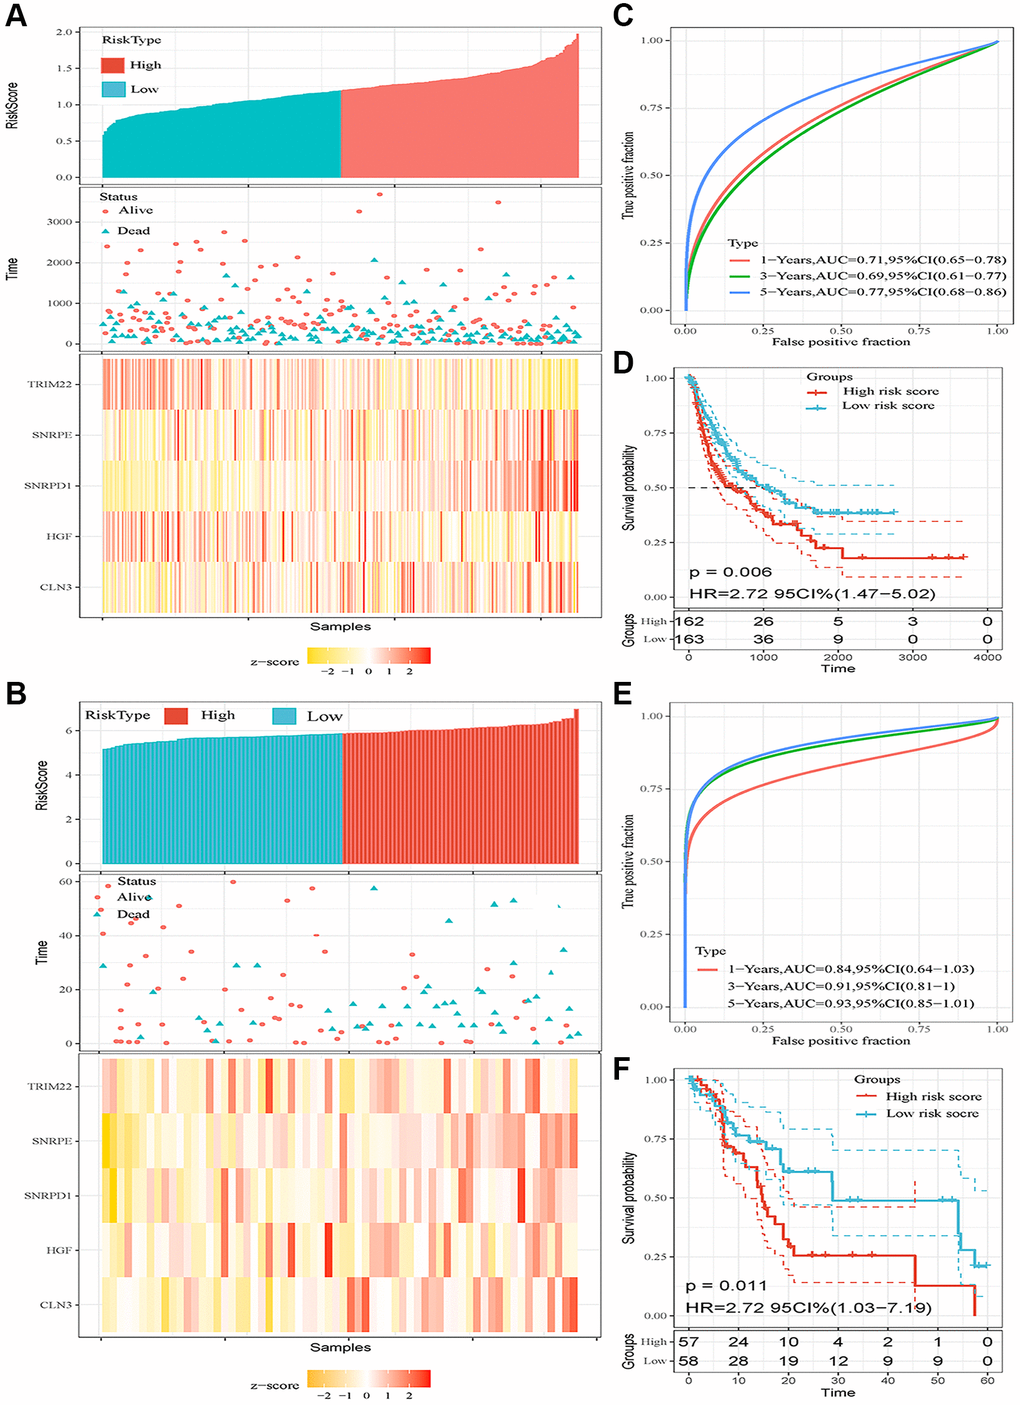 Prognostic analysis of the five-autophagy-related gene signature model in two validation sets (TCGA HCC cohort and GSE76427 dataset). (A, B) Risk score and mRNA expressed heatmap of the five-gene signature in the TCGA HCC cohort (A) and GSE76427 dataset (B). (C) Time-dependent ROC curves of the five-gene signature in the TCGA HCC cohort. (D) High-risk score correlated with poor RFS probability in the TCGA HCC cohort. (E) Time-dependent ROC curves of the five-gene signature in the GSE76427 cohort. (F) High-risk score correlated with poor RFS probability in the GSE76427 cohort.